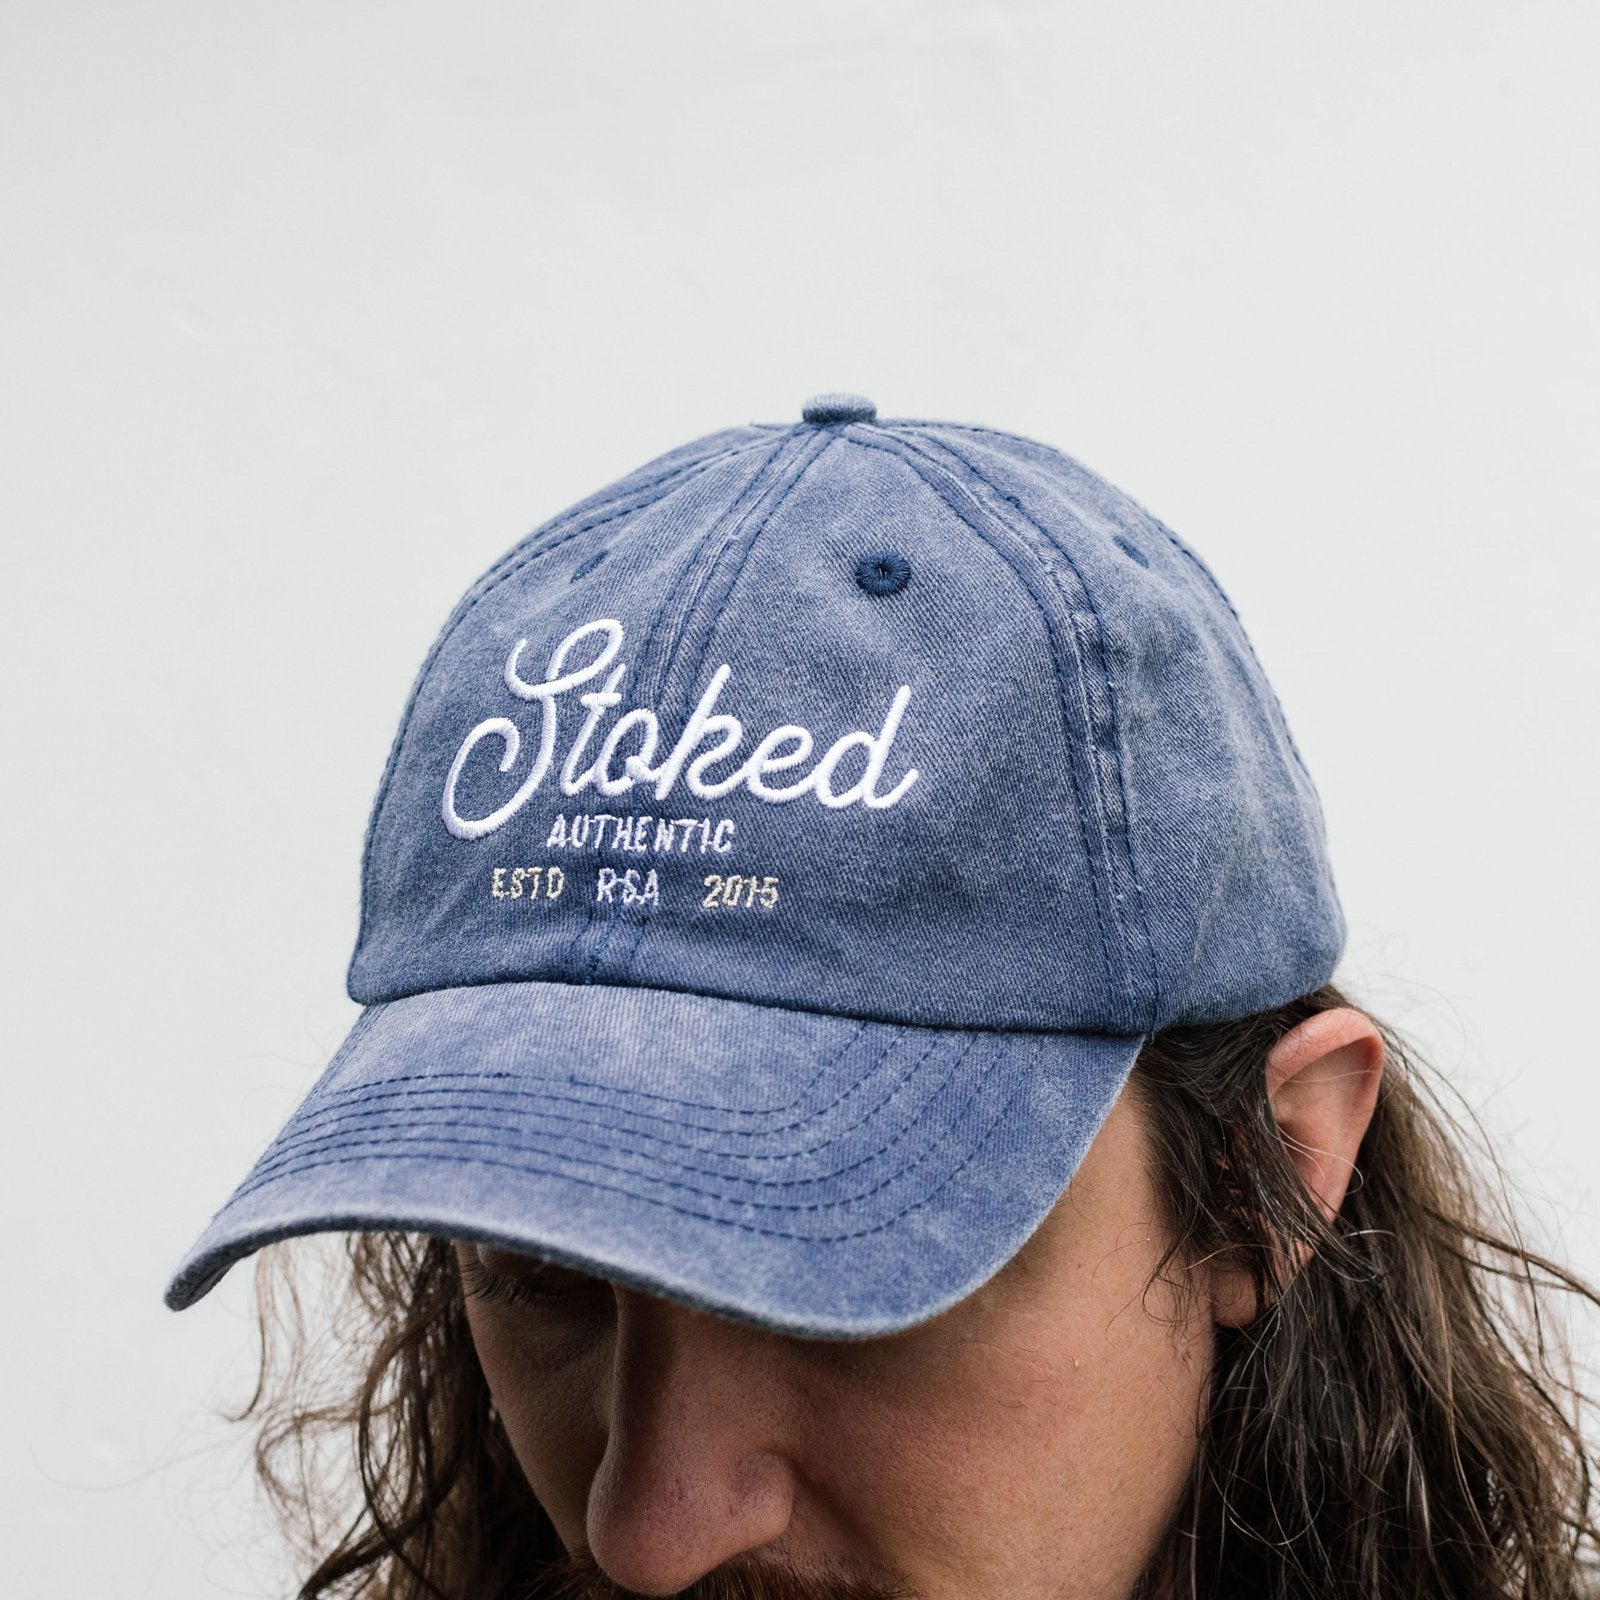 The Stoked Washed Navy Cap - Stokedthebrand. Lifestyle products for outdoor adventures. Made in South Africa